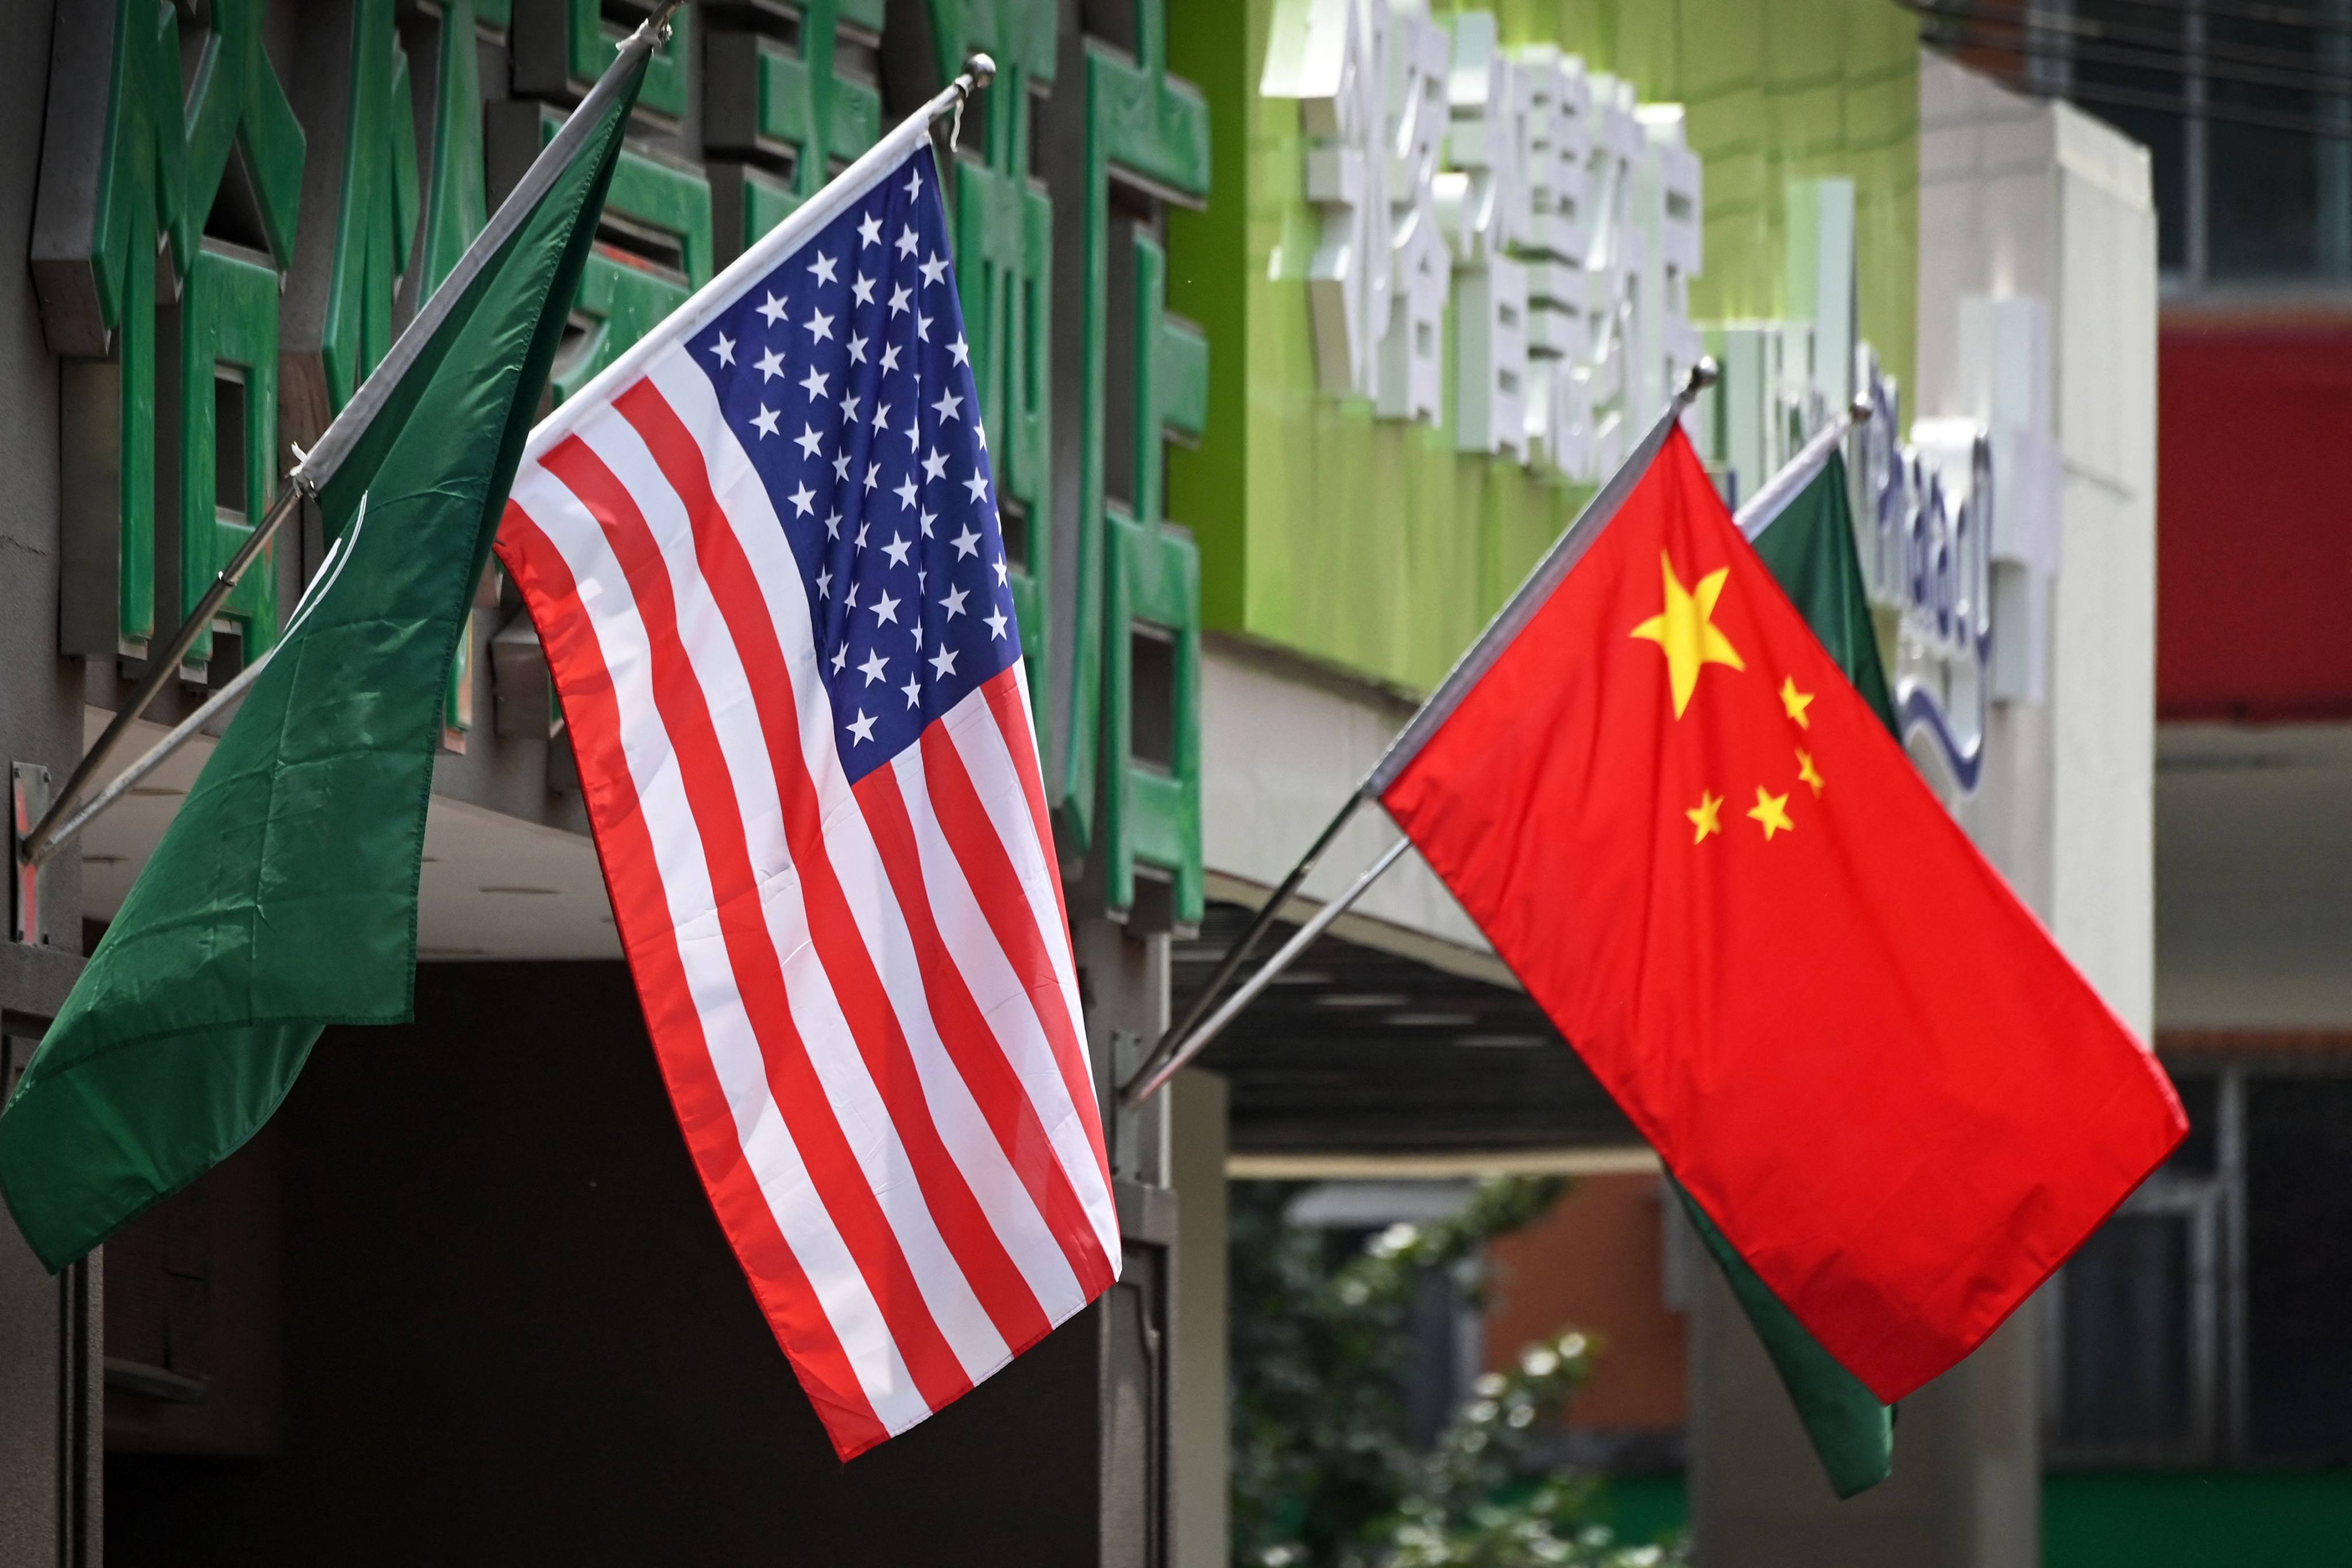 The flags of the United States and China on display at a Beijing hotel on May 14, 2019. Photo: AFP